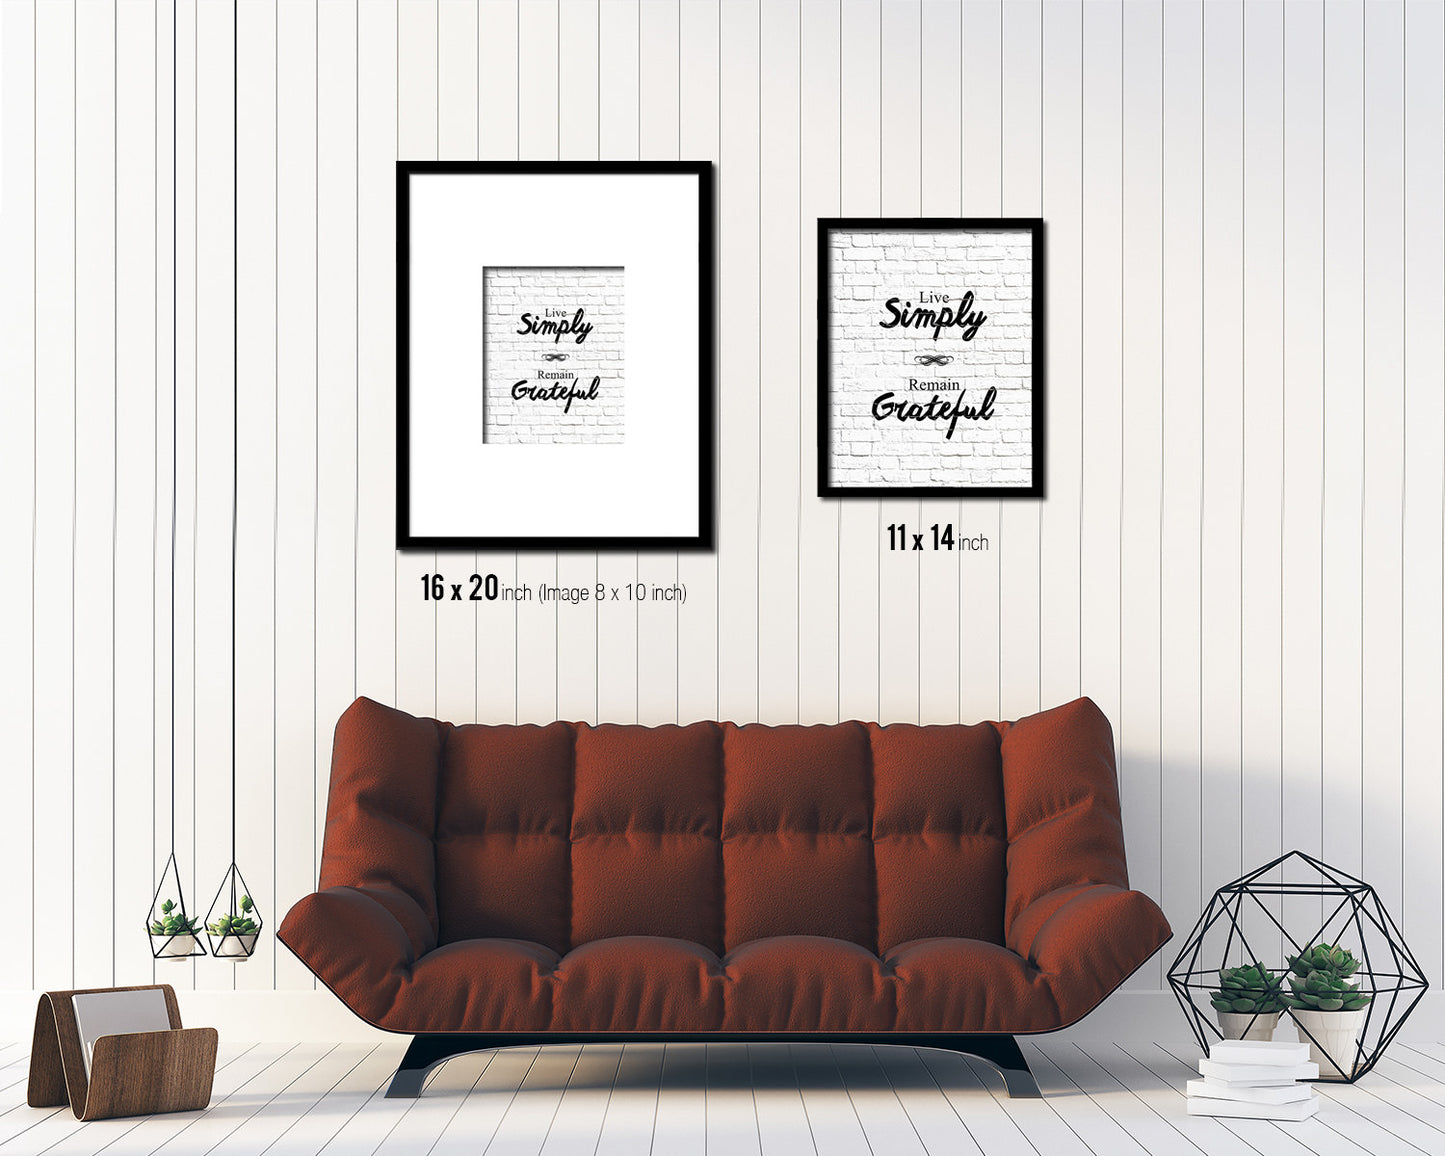 Live simply remain grateful Quote Framed Print Home Decor Wall Art Gifts